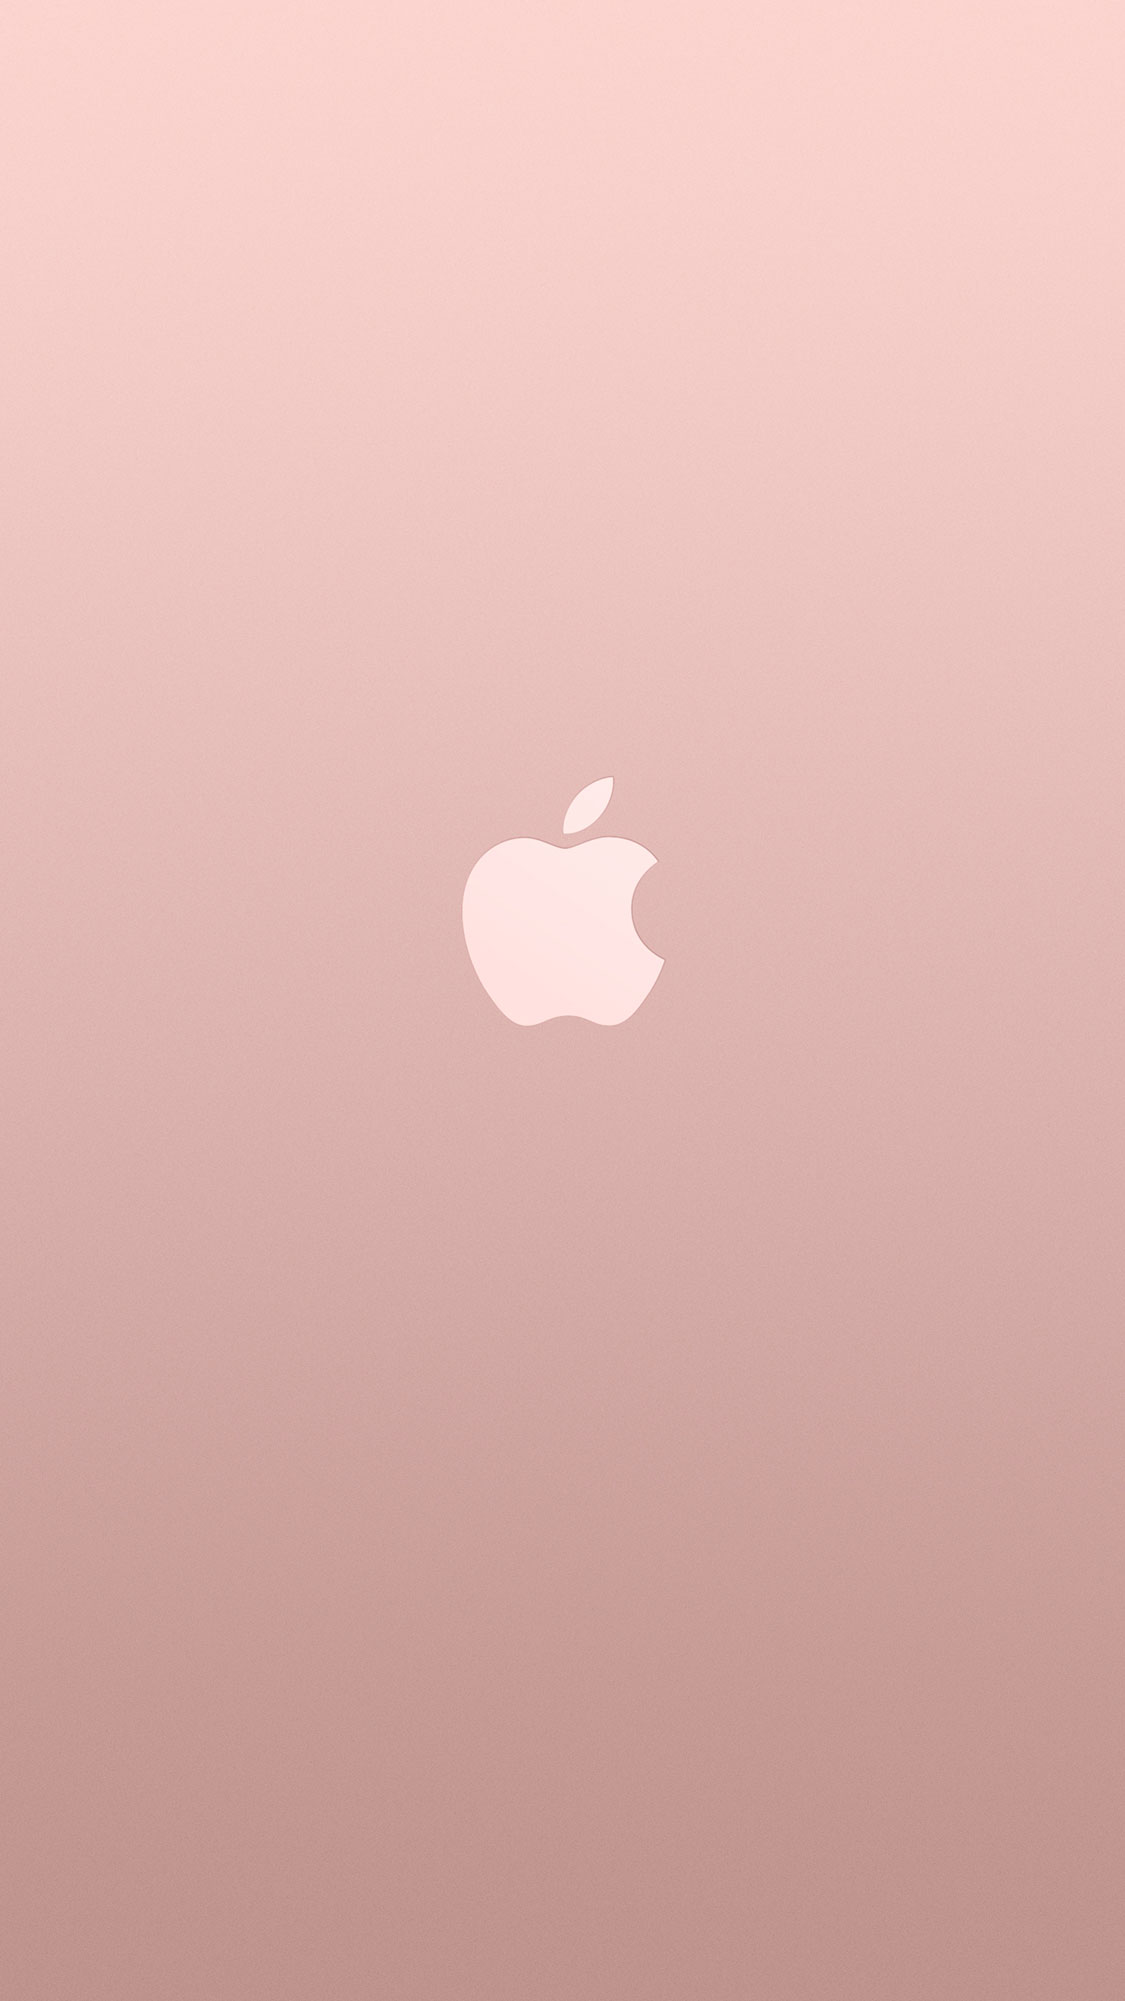 New iPhone 6s Wallpaper Background In HD Quality